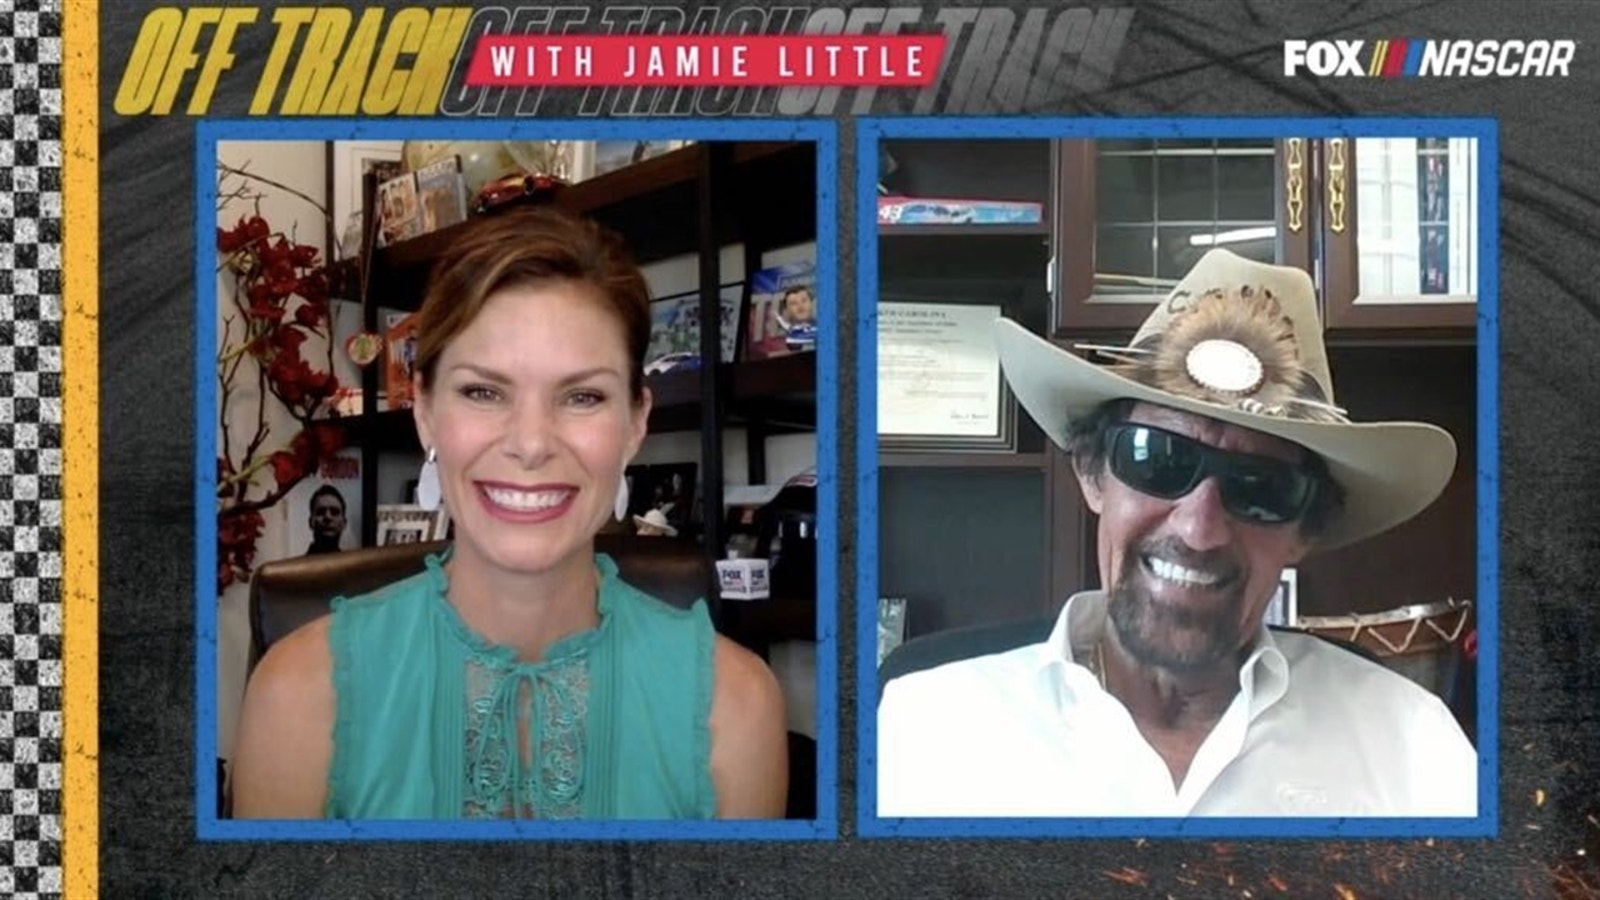 NASCAR legend Richard Petty on Bubba Wallace, his Hall of Fame career | OFF TRACK